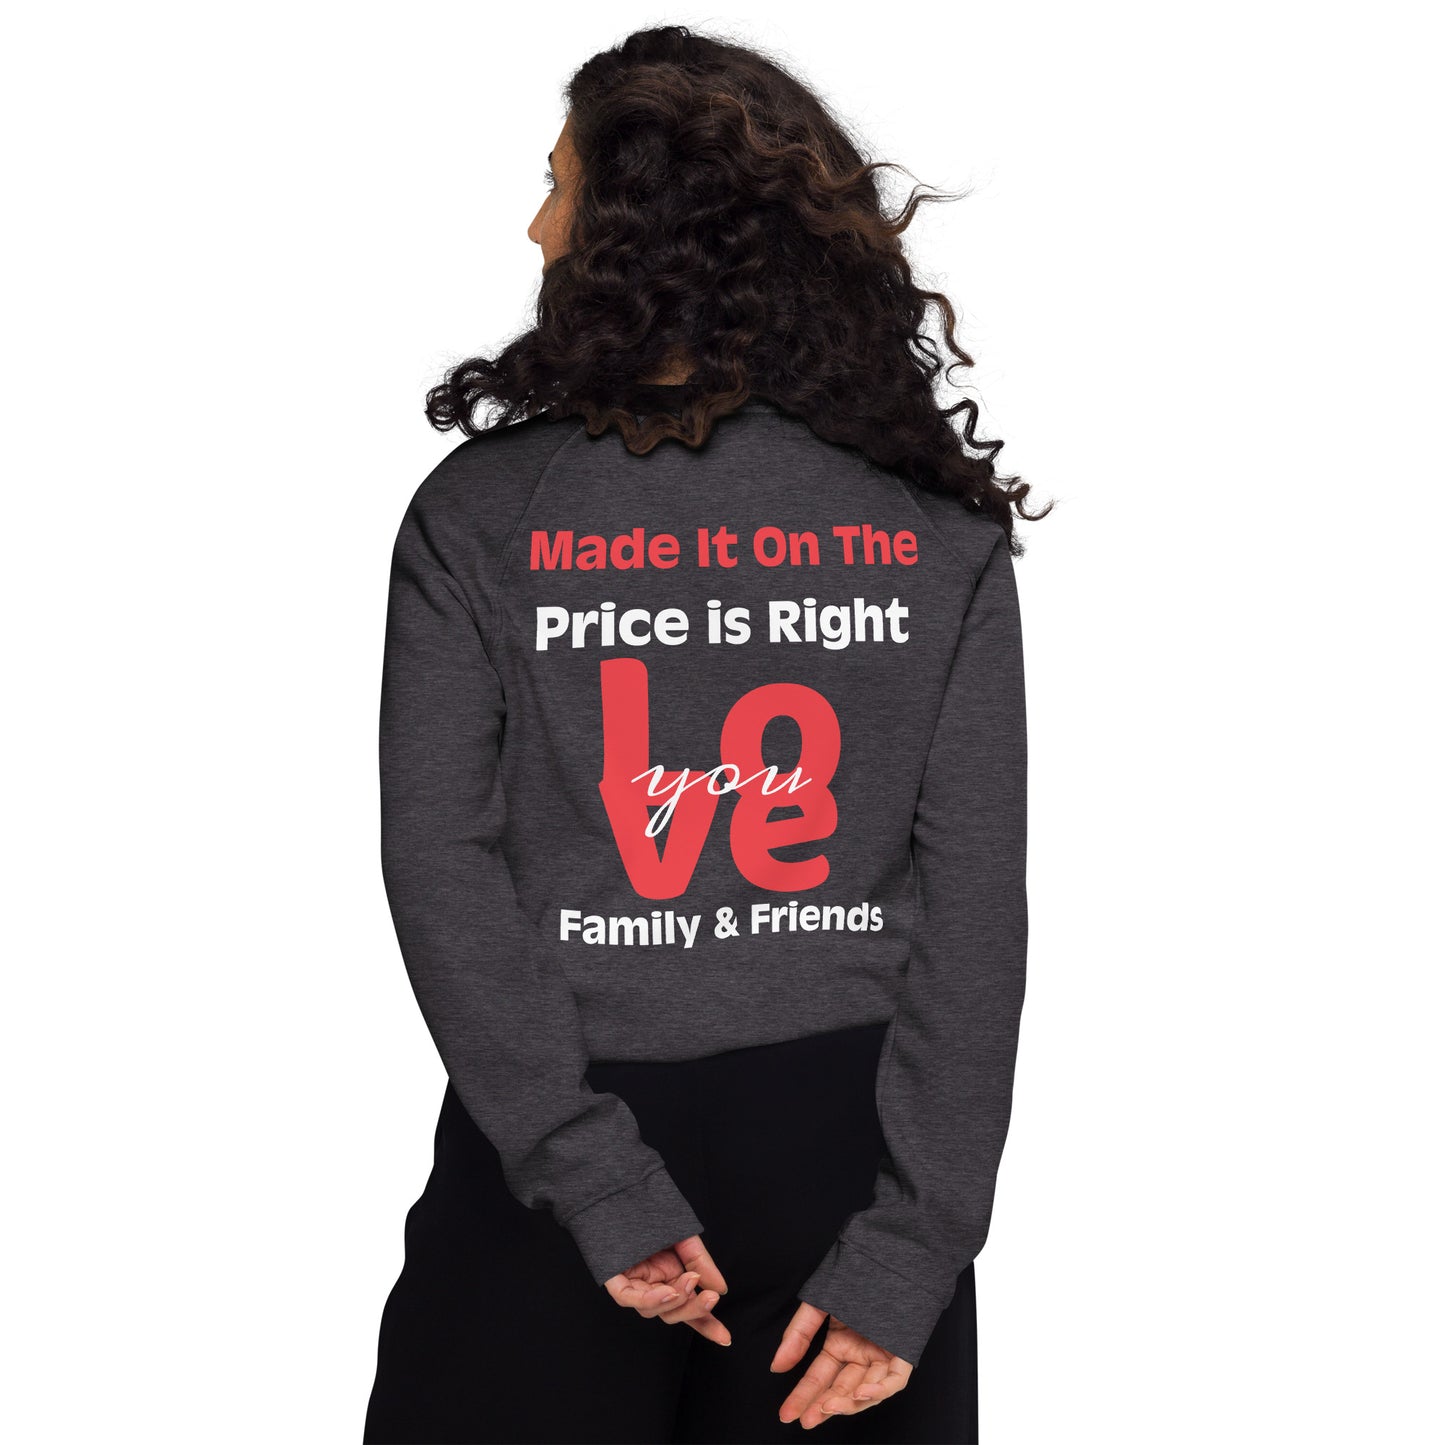 Unisex organic raglan sweatshirt - The Price Is Right - Spin The Wheel on Front -  Greeting to Family & Friends on Back